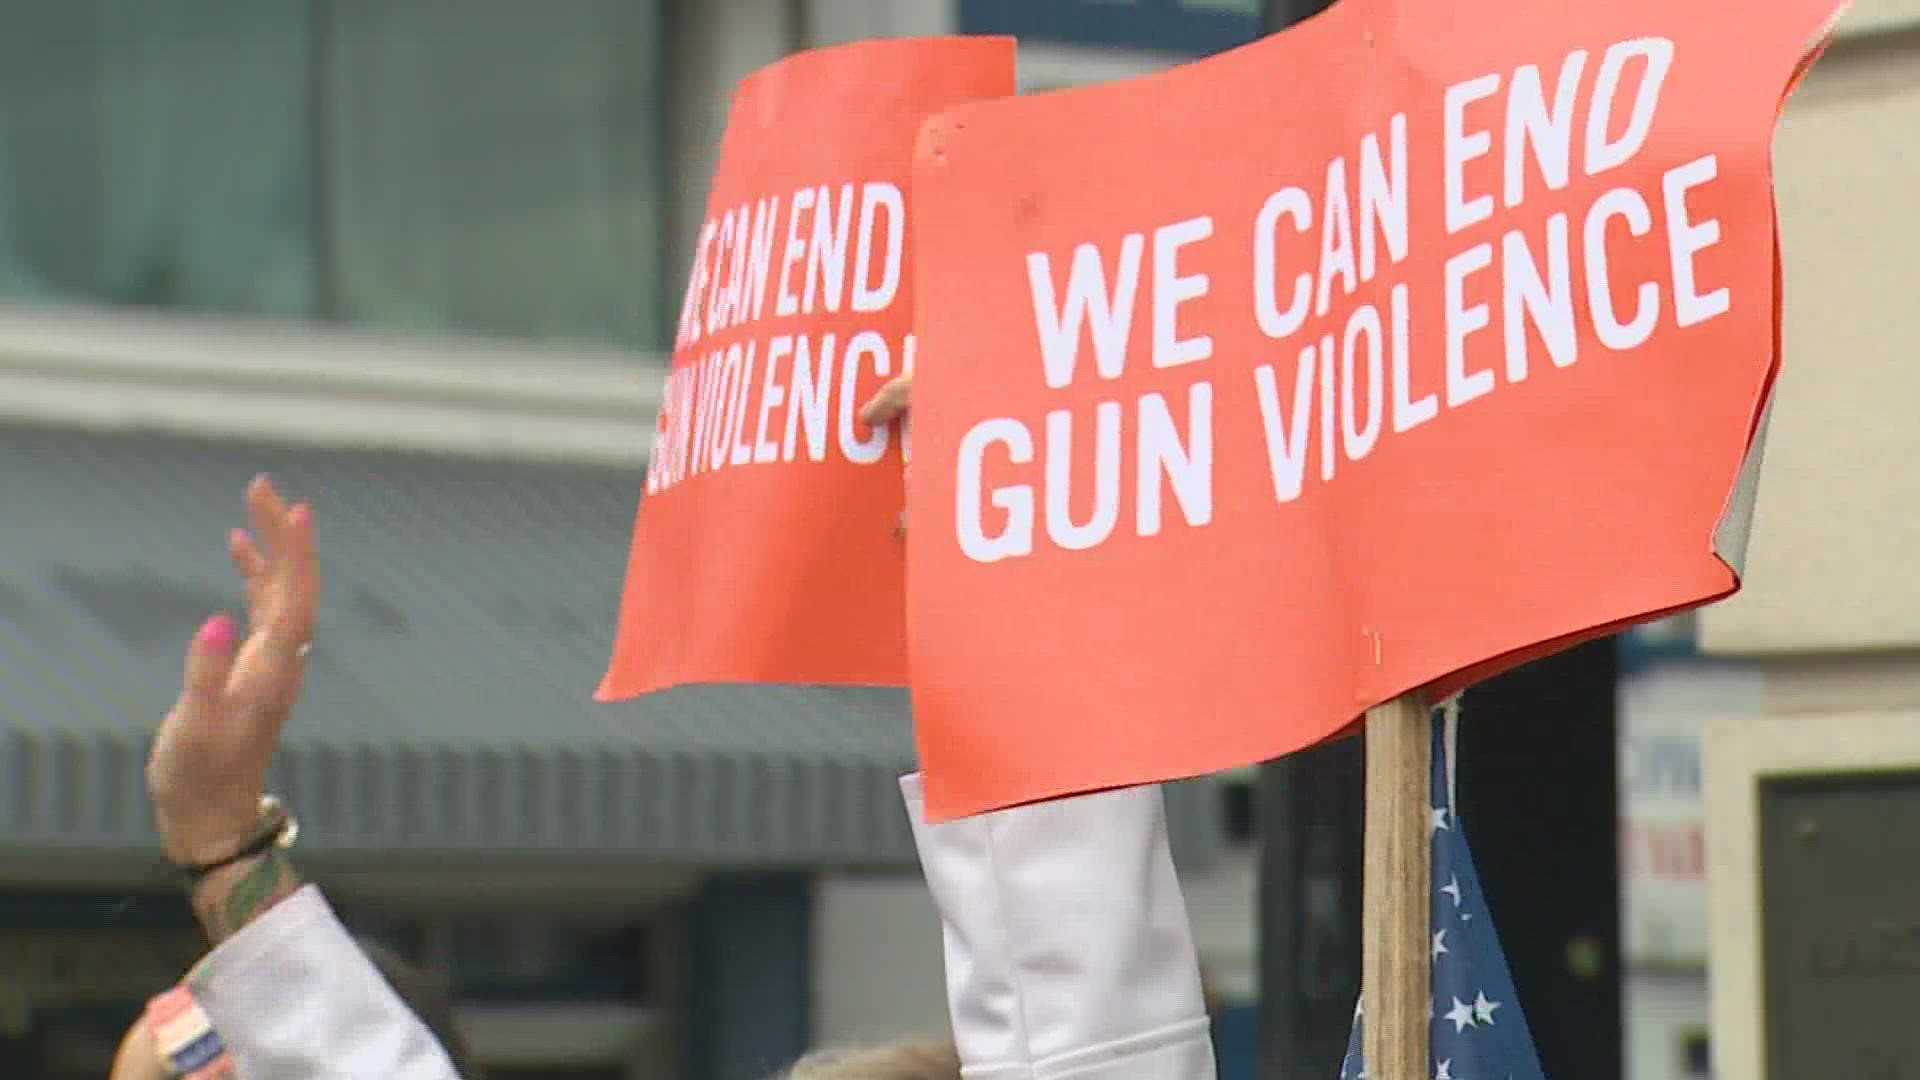 Multiple events are taking place across the Puget Sound region to raise awareness about the gun violence epidemic and to honor victims and survivors.